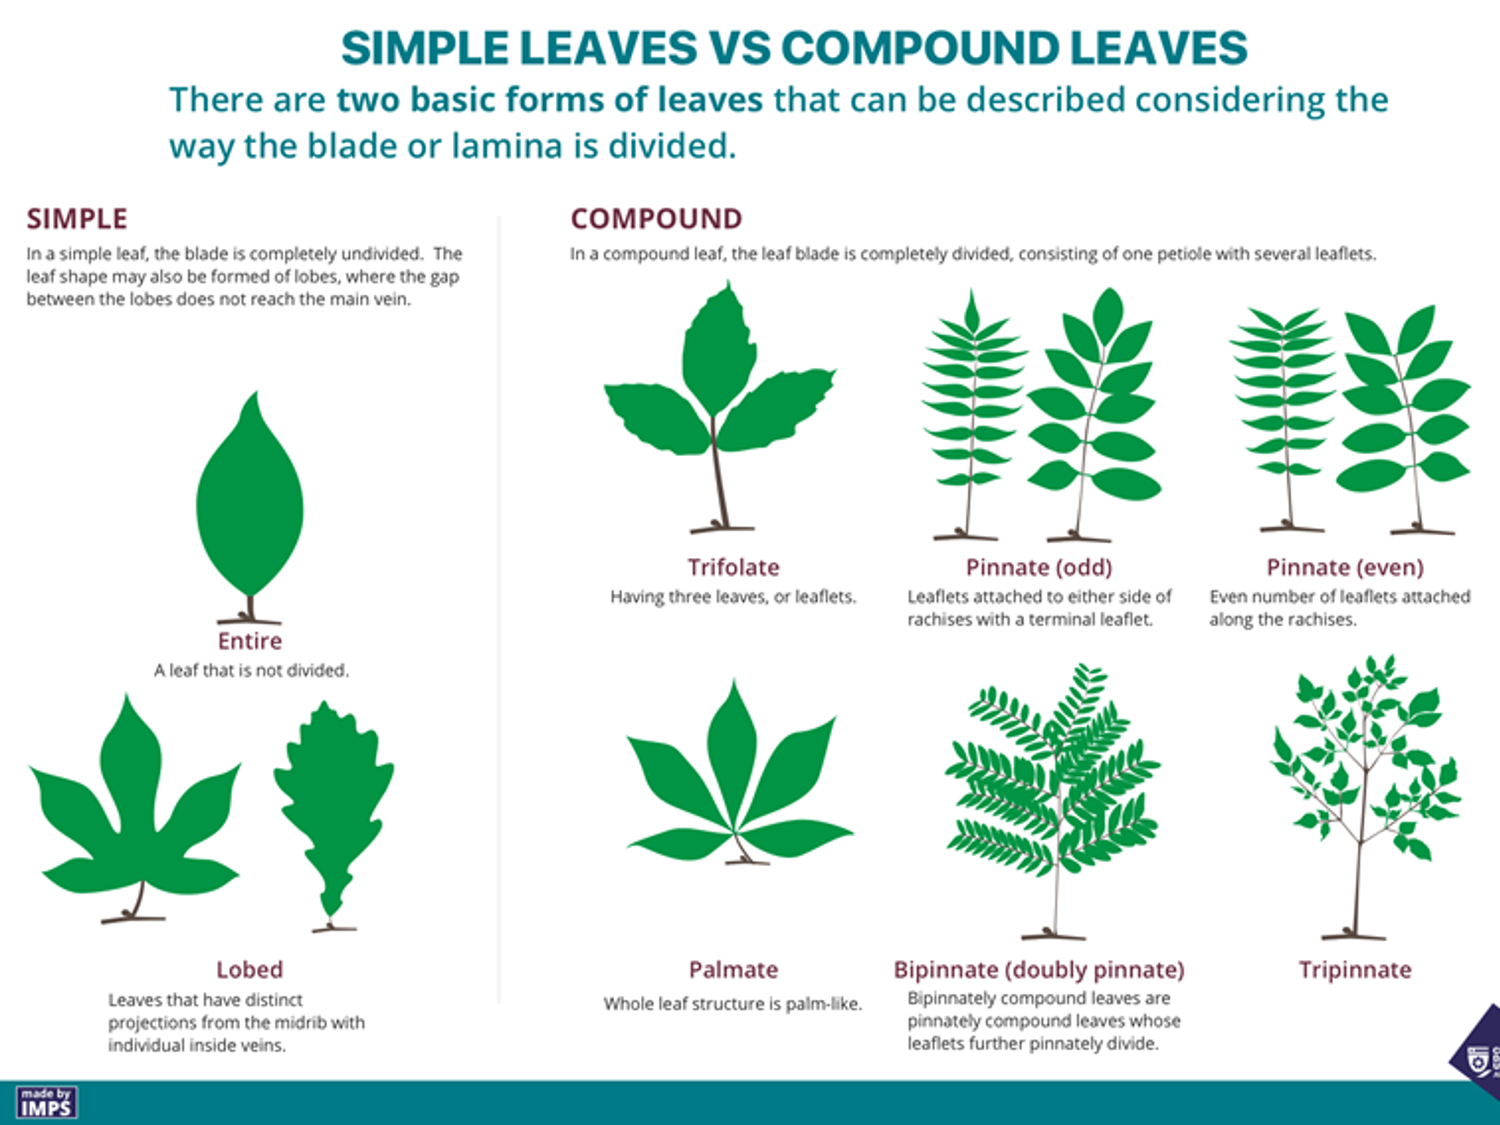 There are two basic forms of leaves that can be described considering the way the blade or lamina is divided. In a simple leaf, the blade is completely undivided. IN a compound leaf, the leeaf blade is completely divided.